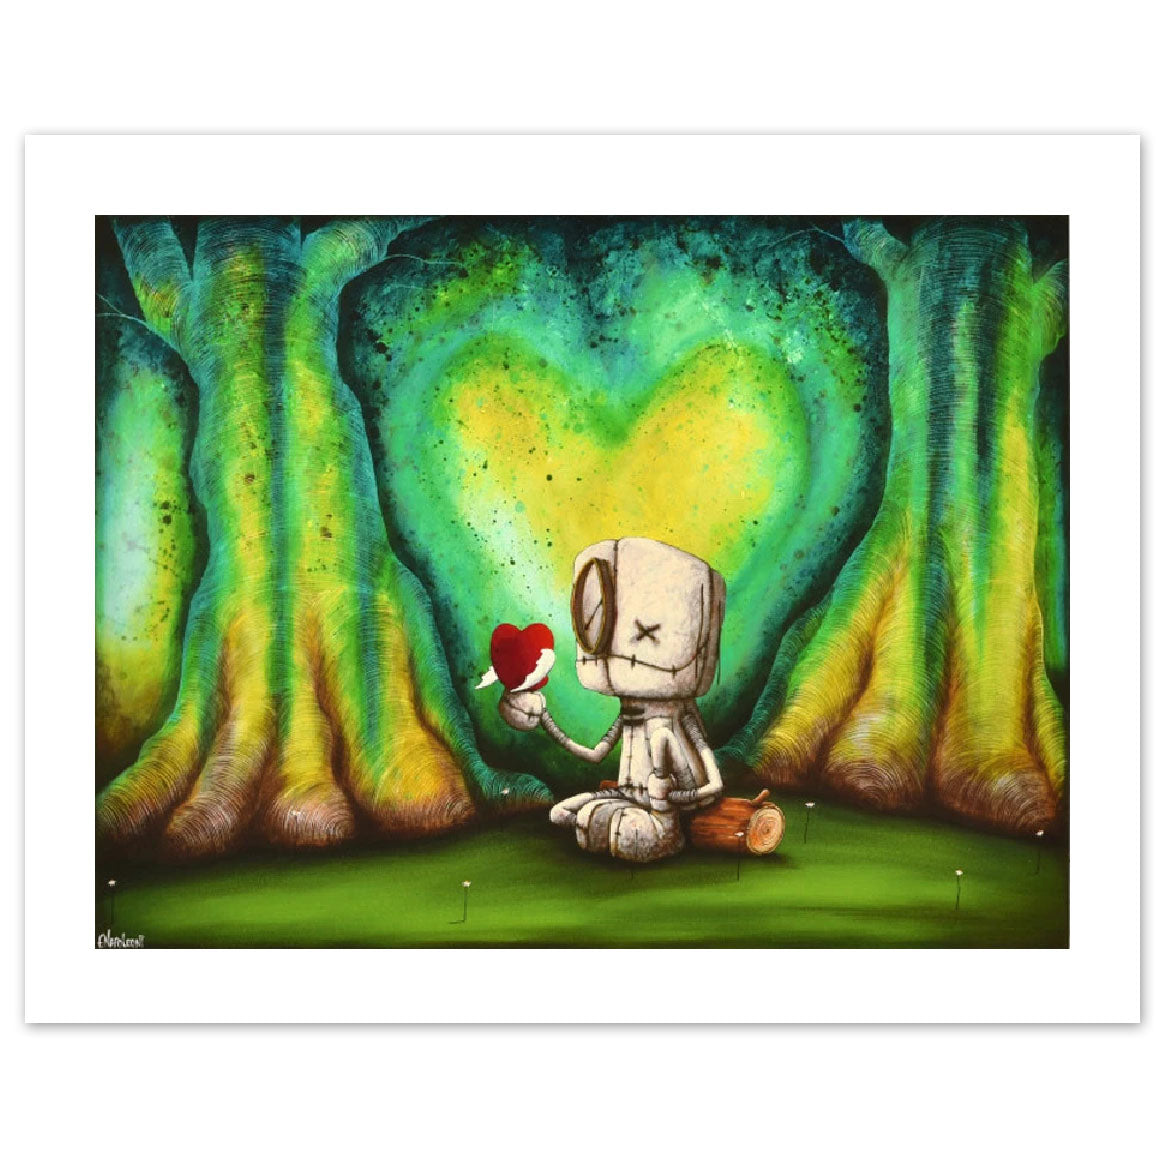 Fabio Napoleoni "Tranquil Presence of Hope" Limited Edition Paper Giclee